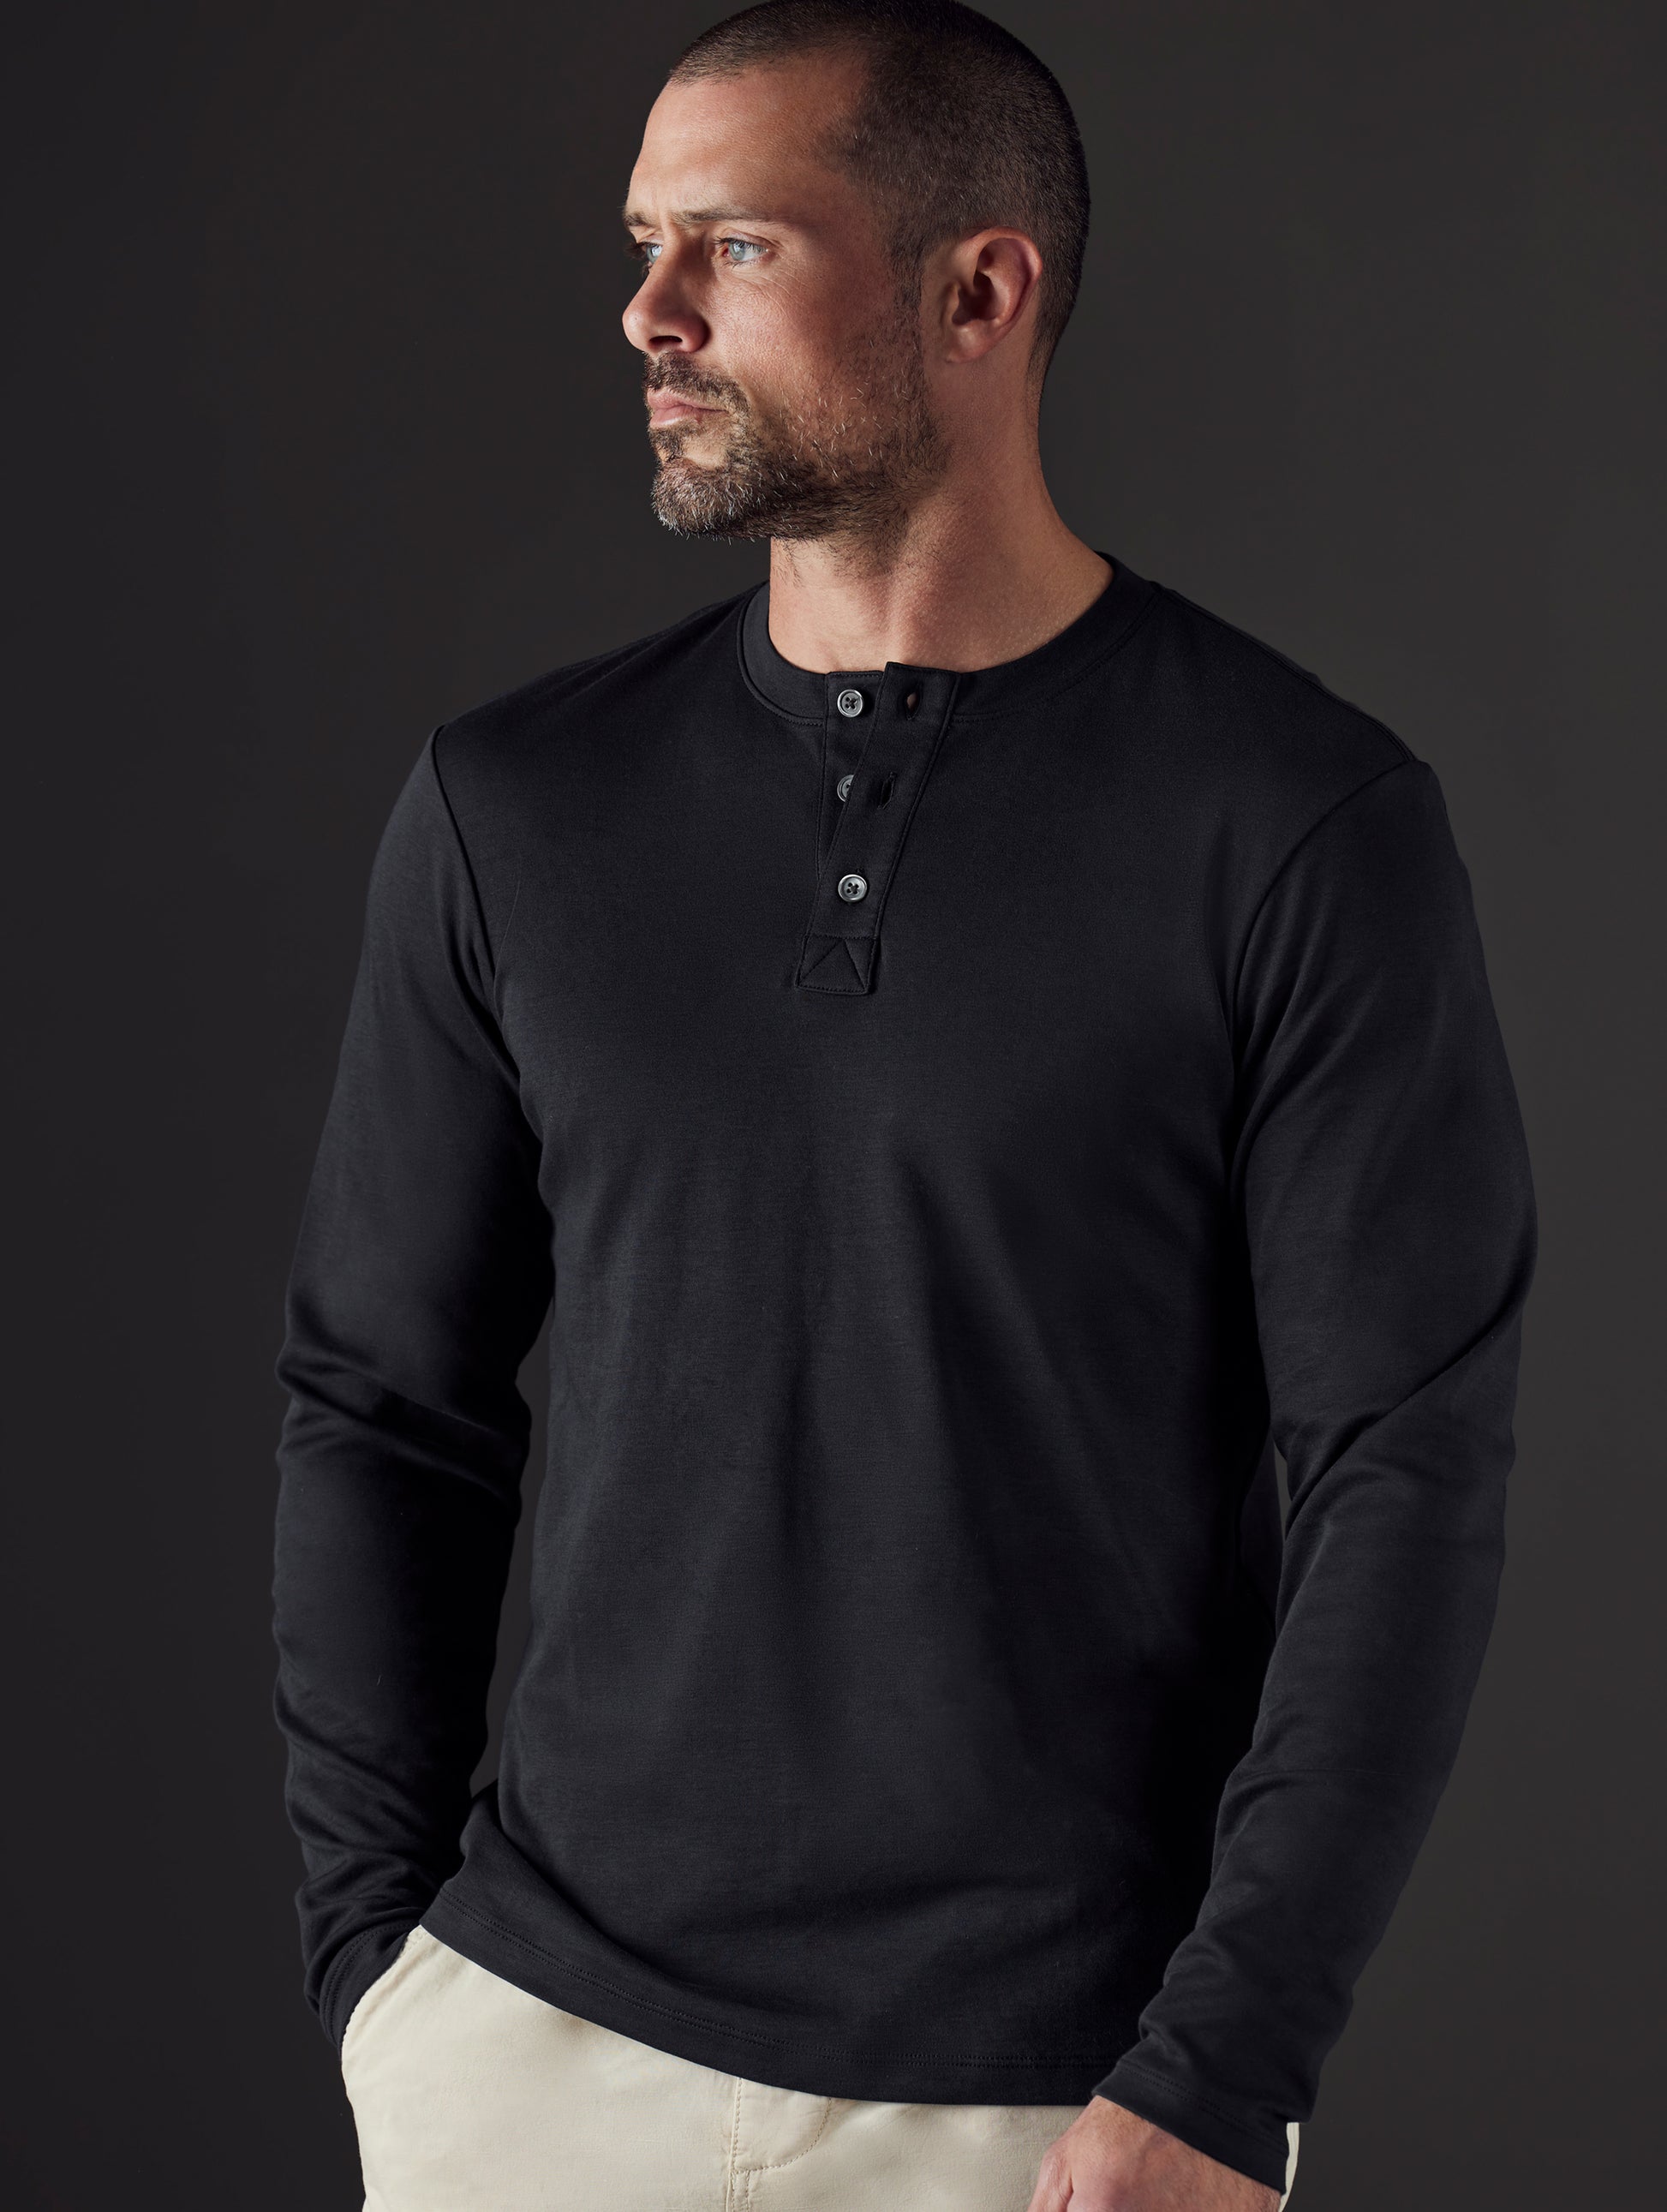 Man wearing black organic cotton henley from AETHER Apparel